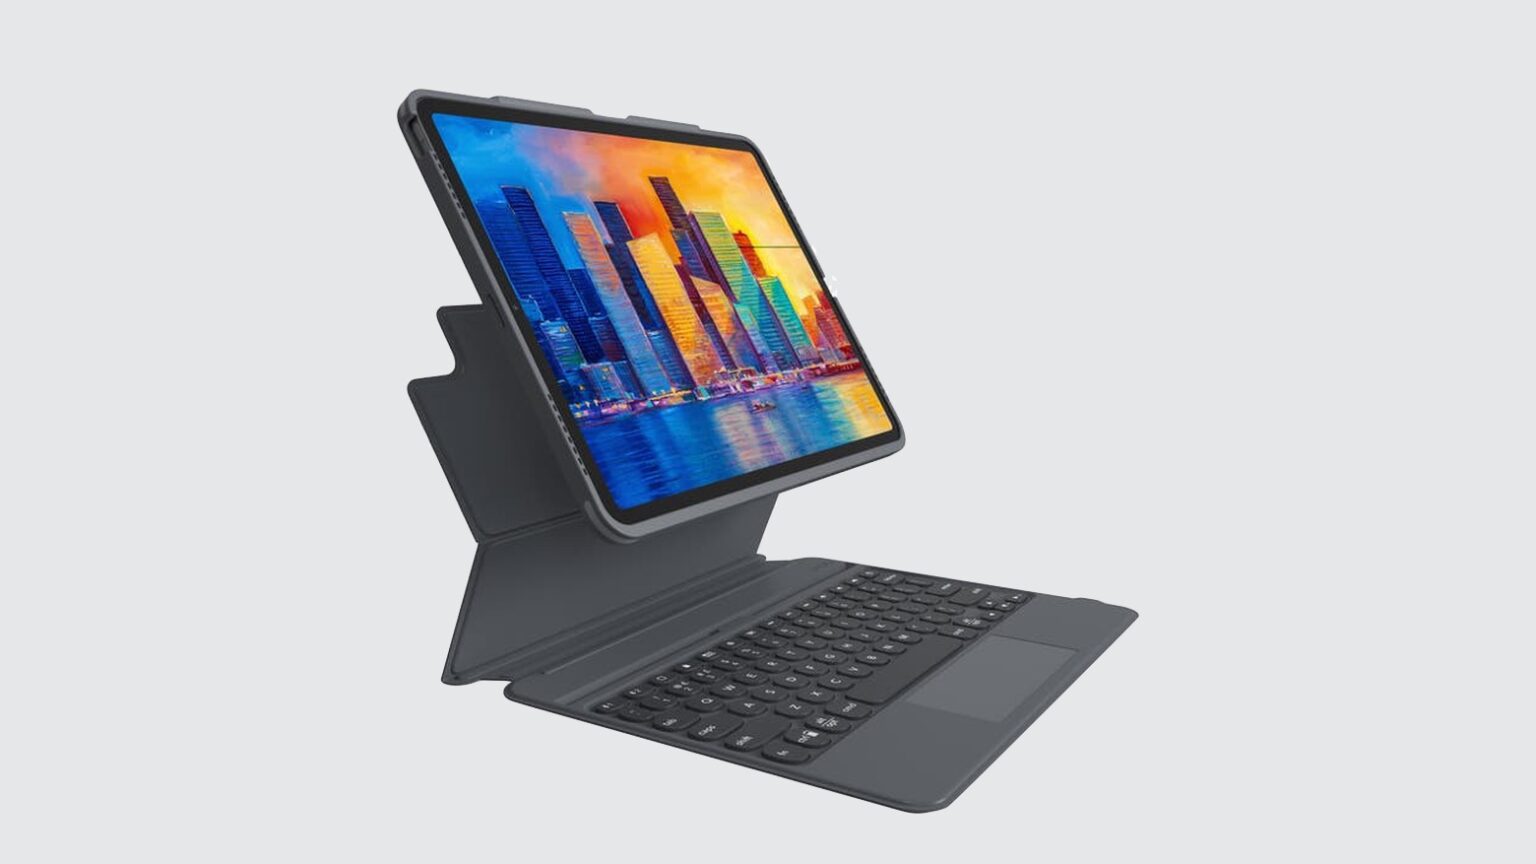 Zagg's capable Pro Keys keyboard case expands to fit 12.9-inch iPad Pro